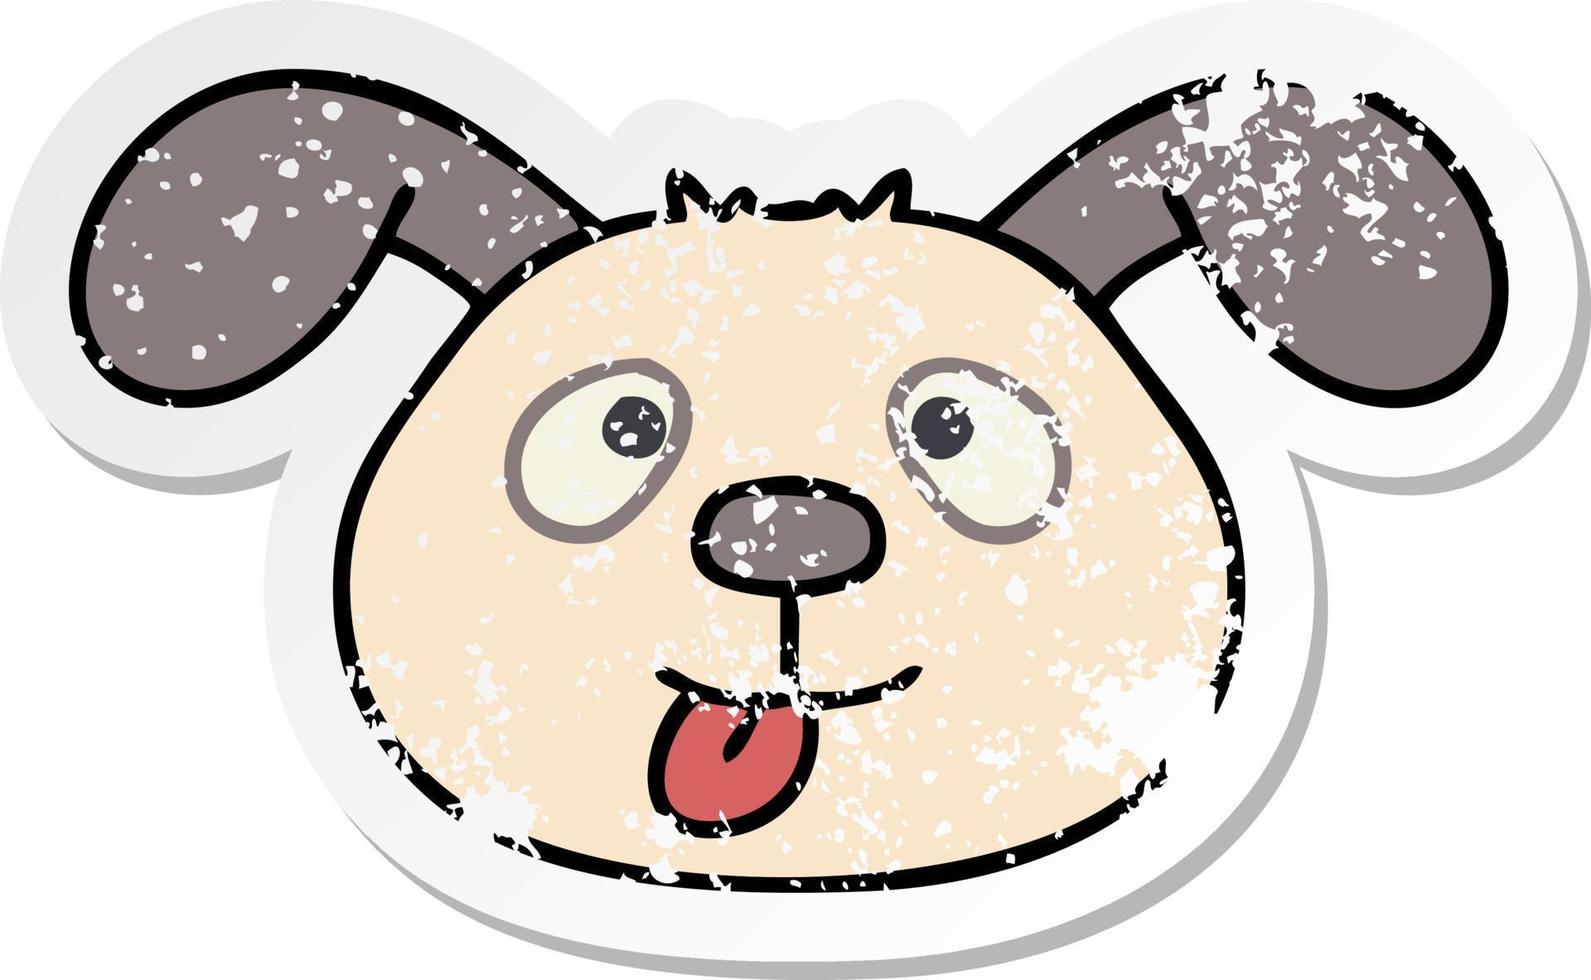 distressed sticker of a quirky hand drawn cartoon dog face vector